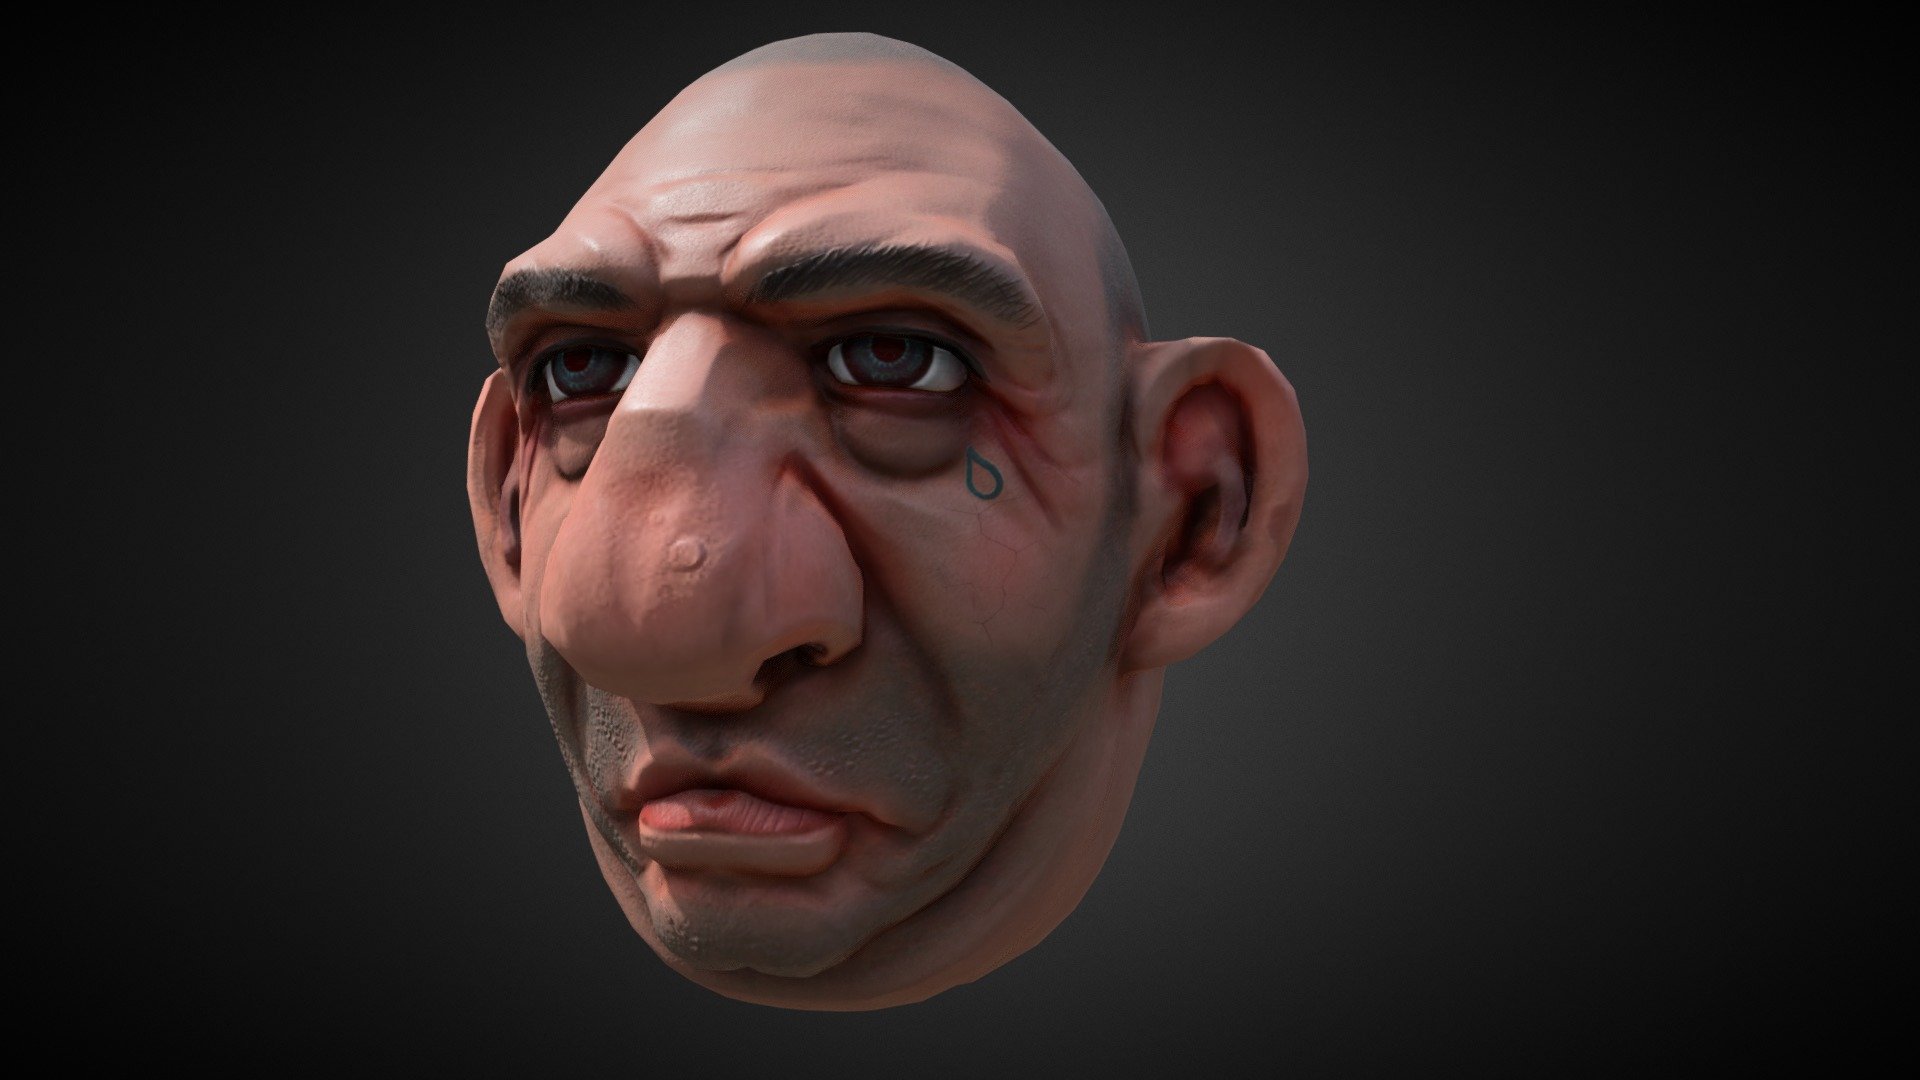 Blender sculpt with retopoflow add on then substance painter for texturing. Still playing with substance and learning new things every day - Bobby "fingers" McGuiness - 3D model by martinMCGREGOR 3d model